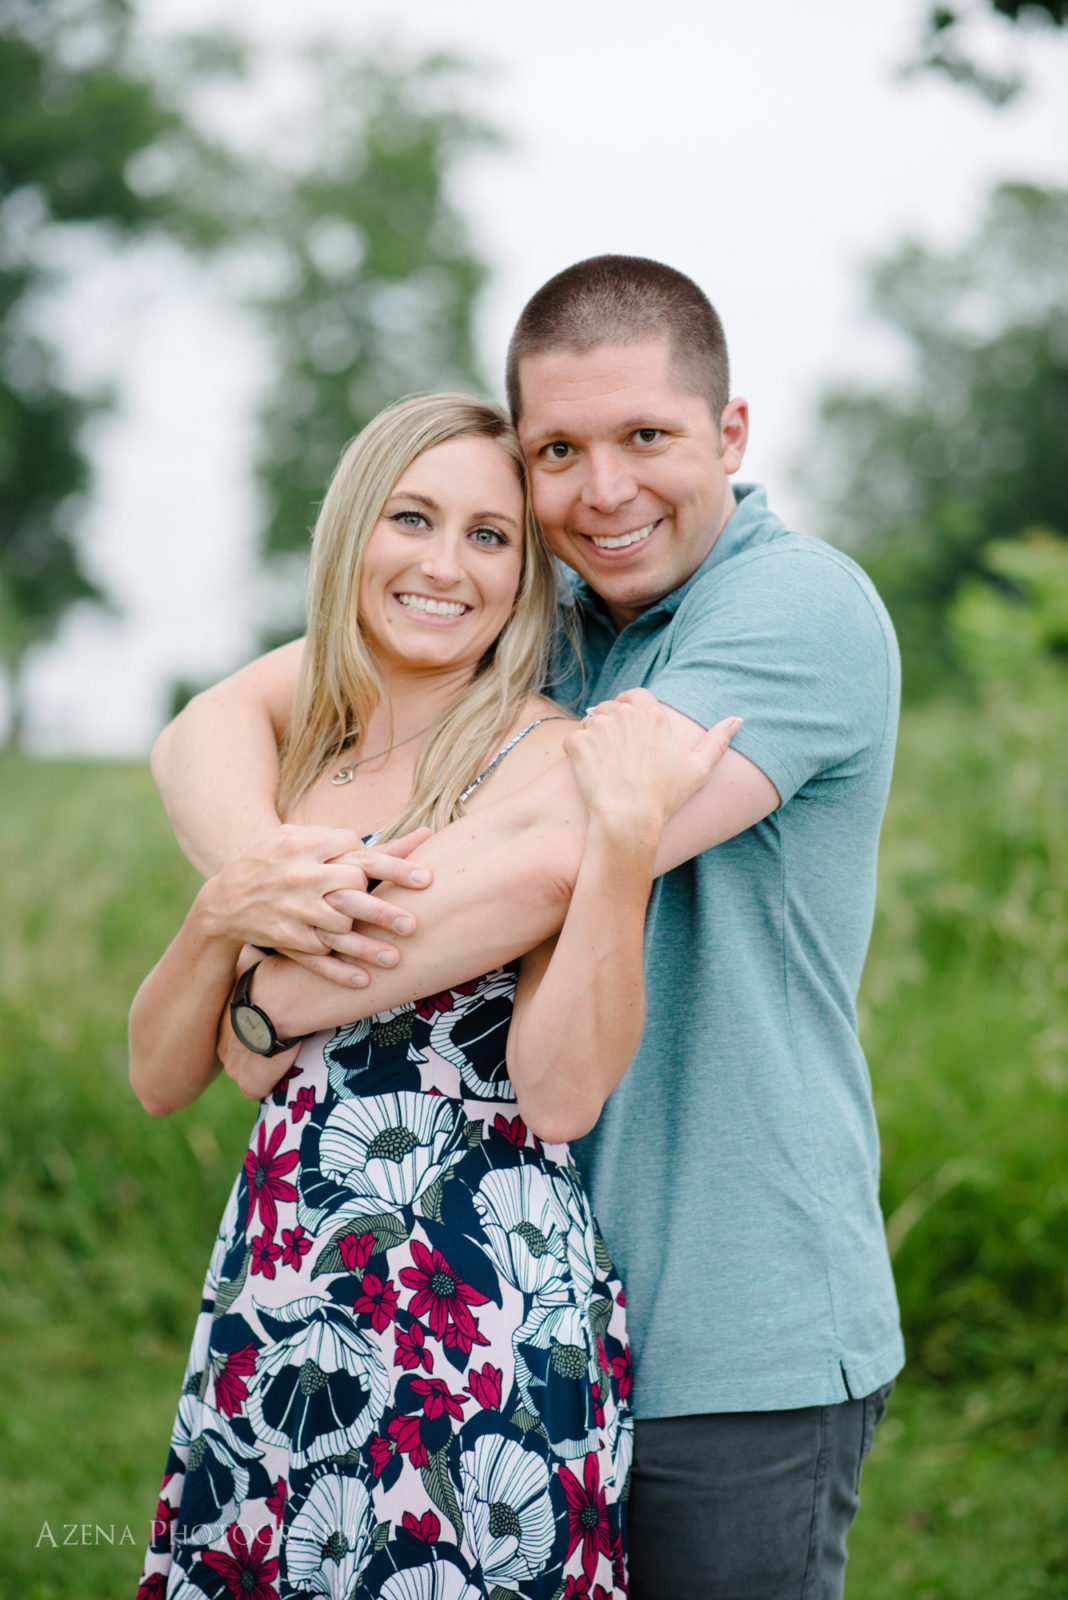 Adorable hug and pose during engagement session at Olin Park in Madison, WI